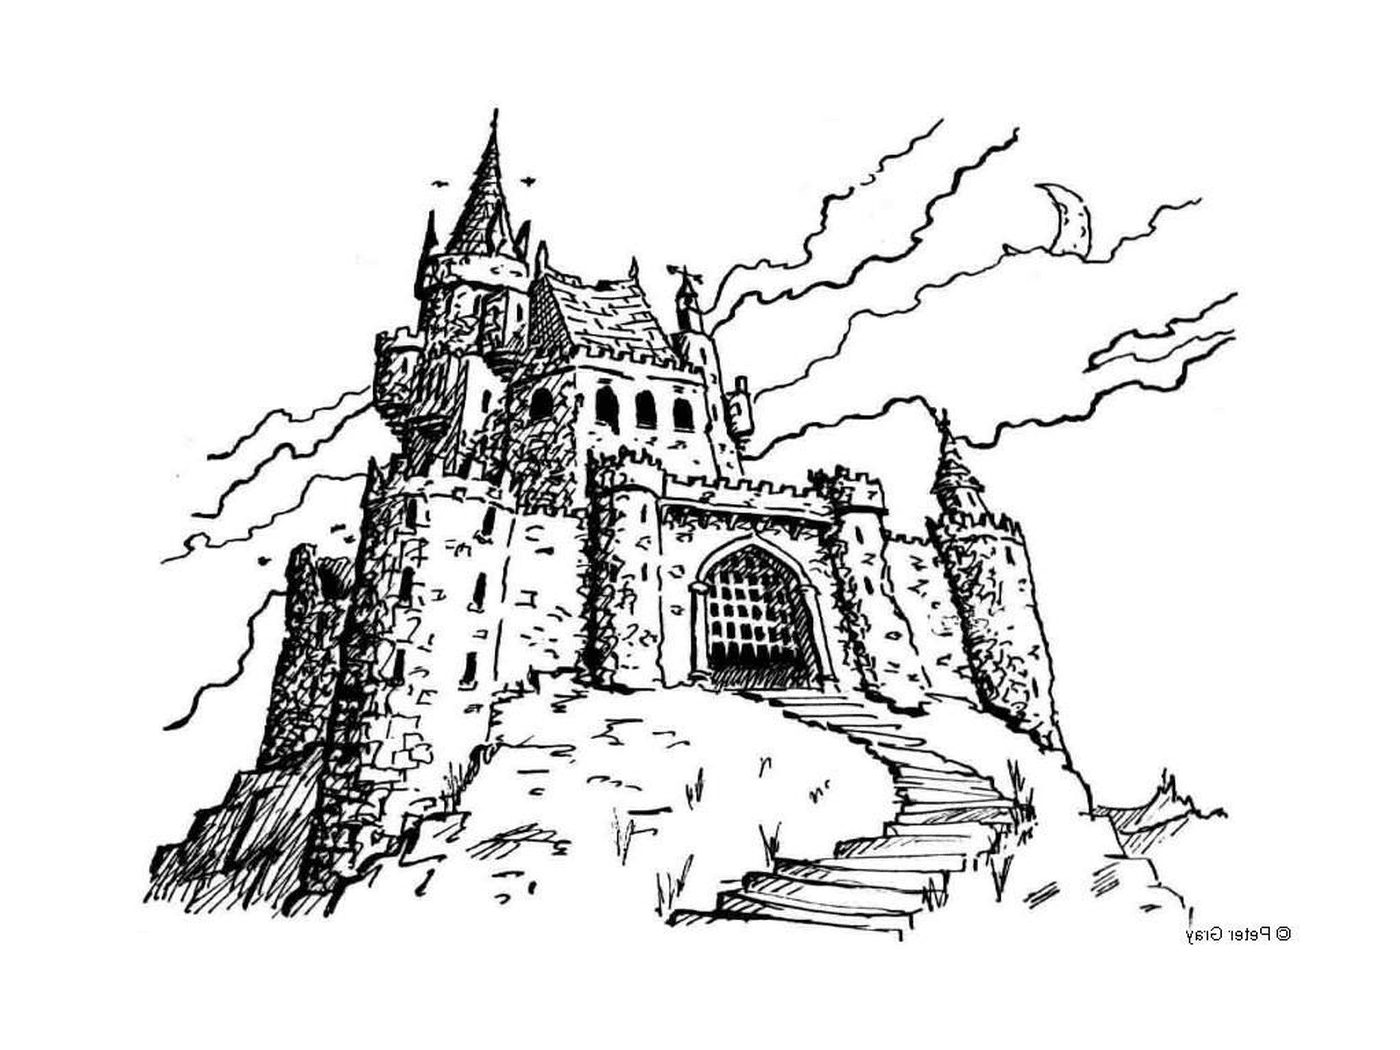  A medieval castle designed by Peter Gray 